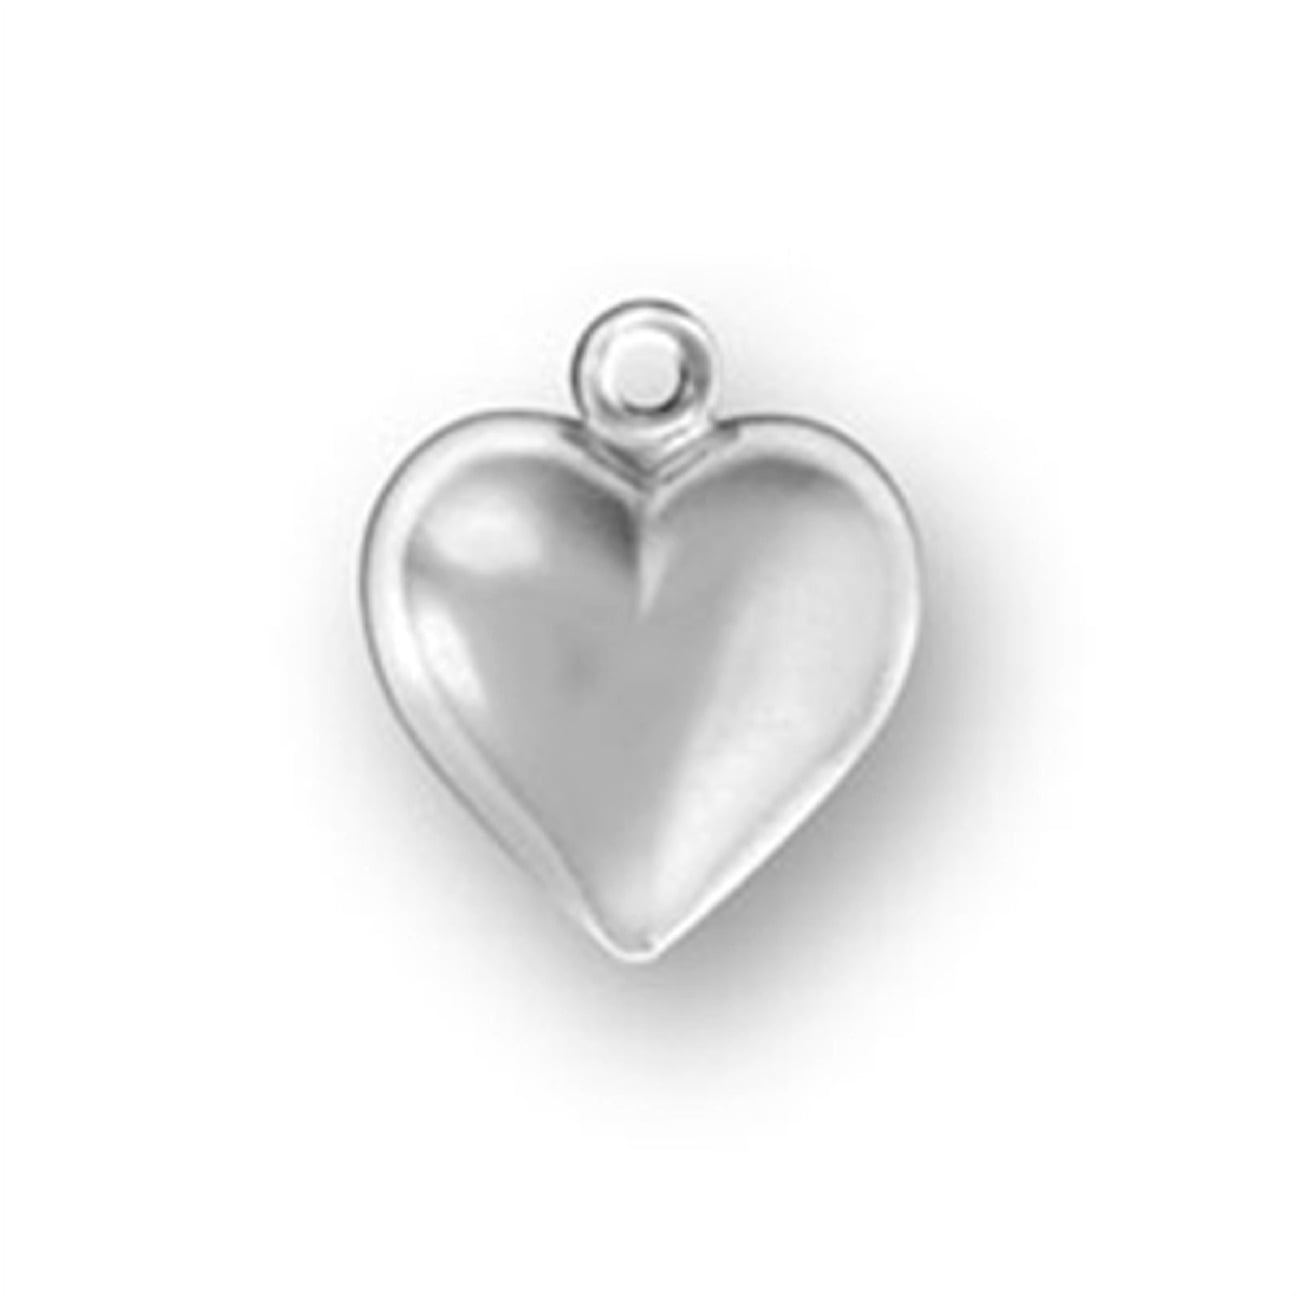 Sterling Silver Persona Heart Pendant Chain Necklace 30" 